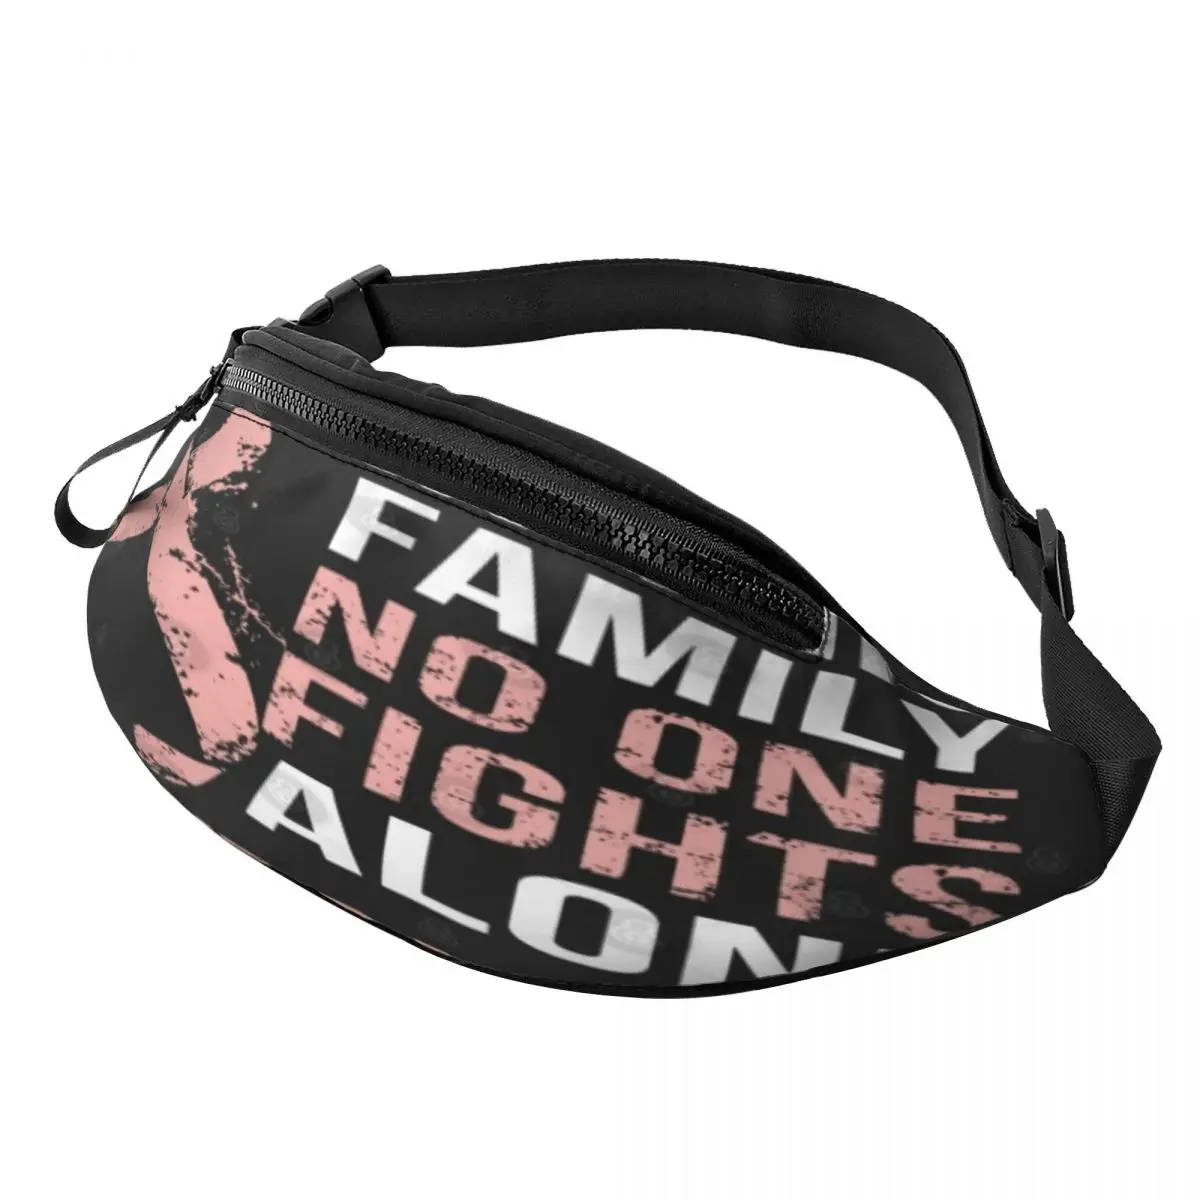 

Uterine Cancer Awareness No One Fights Alone Fanny Pack,Waist Bag Modern Polyester fabric Travel Nice gift Customizable